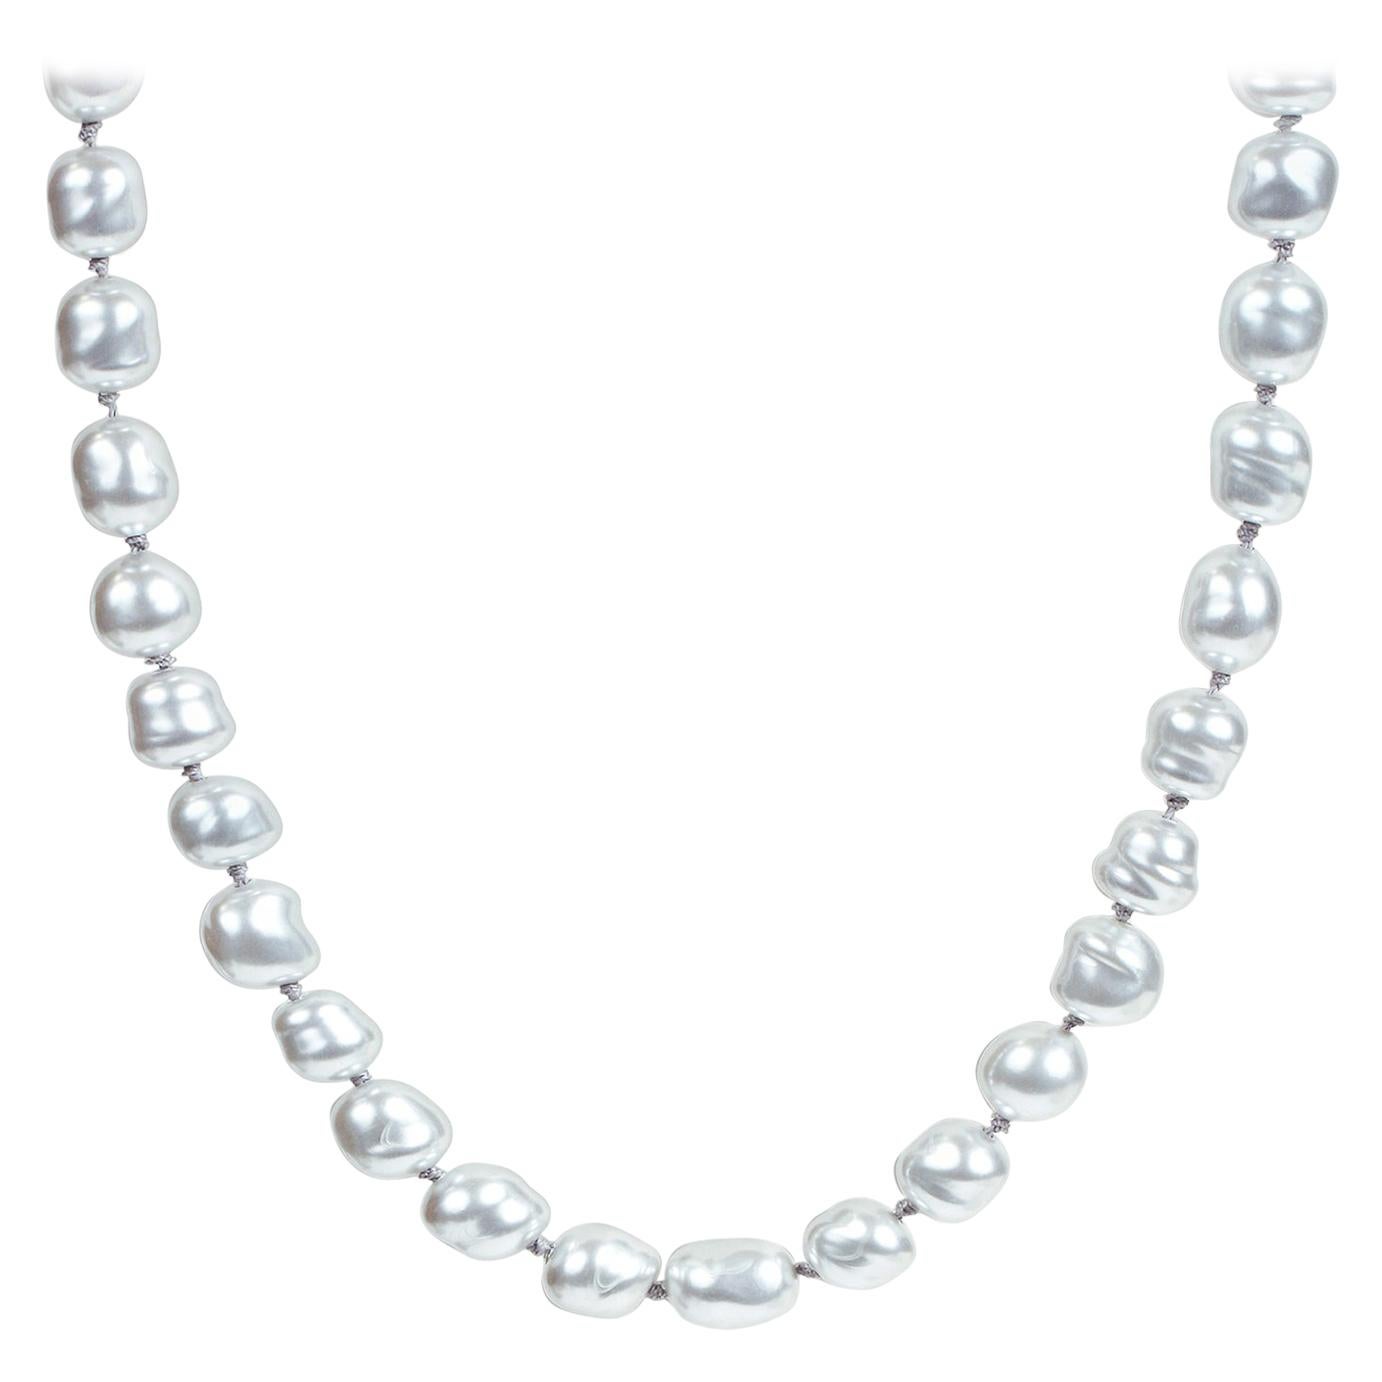 Chanel Silver Pearls Necklace